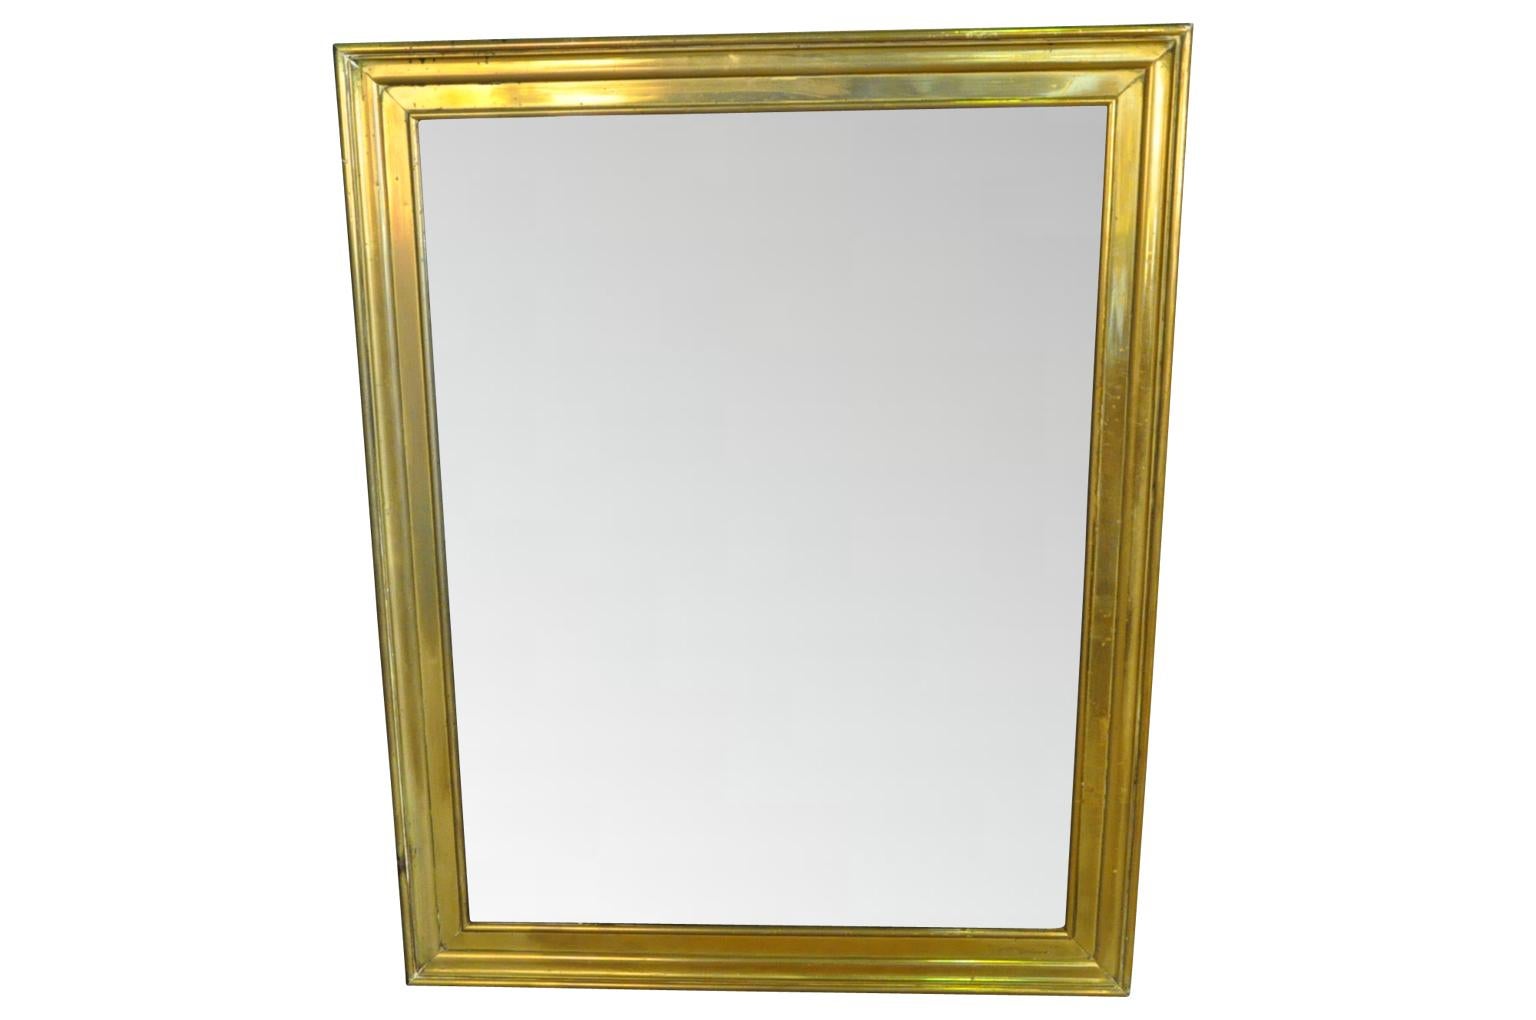 A very striking later 19th century French mirror in beautifully molded brass. This mirror's clean lines lend it a very Classic and contemporary feel. The mirror retains its original mercury glass and the back is wood lined.